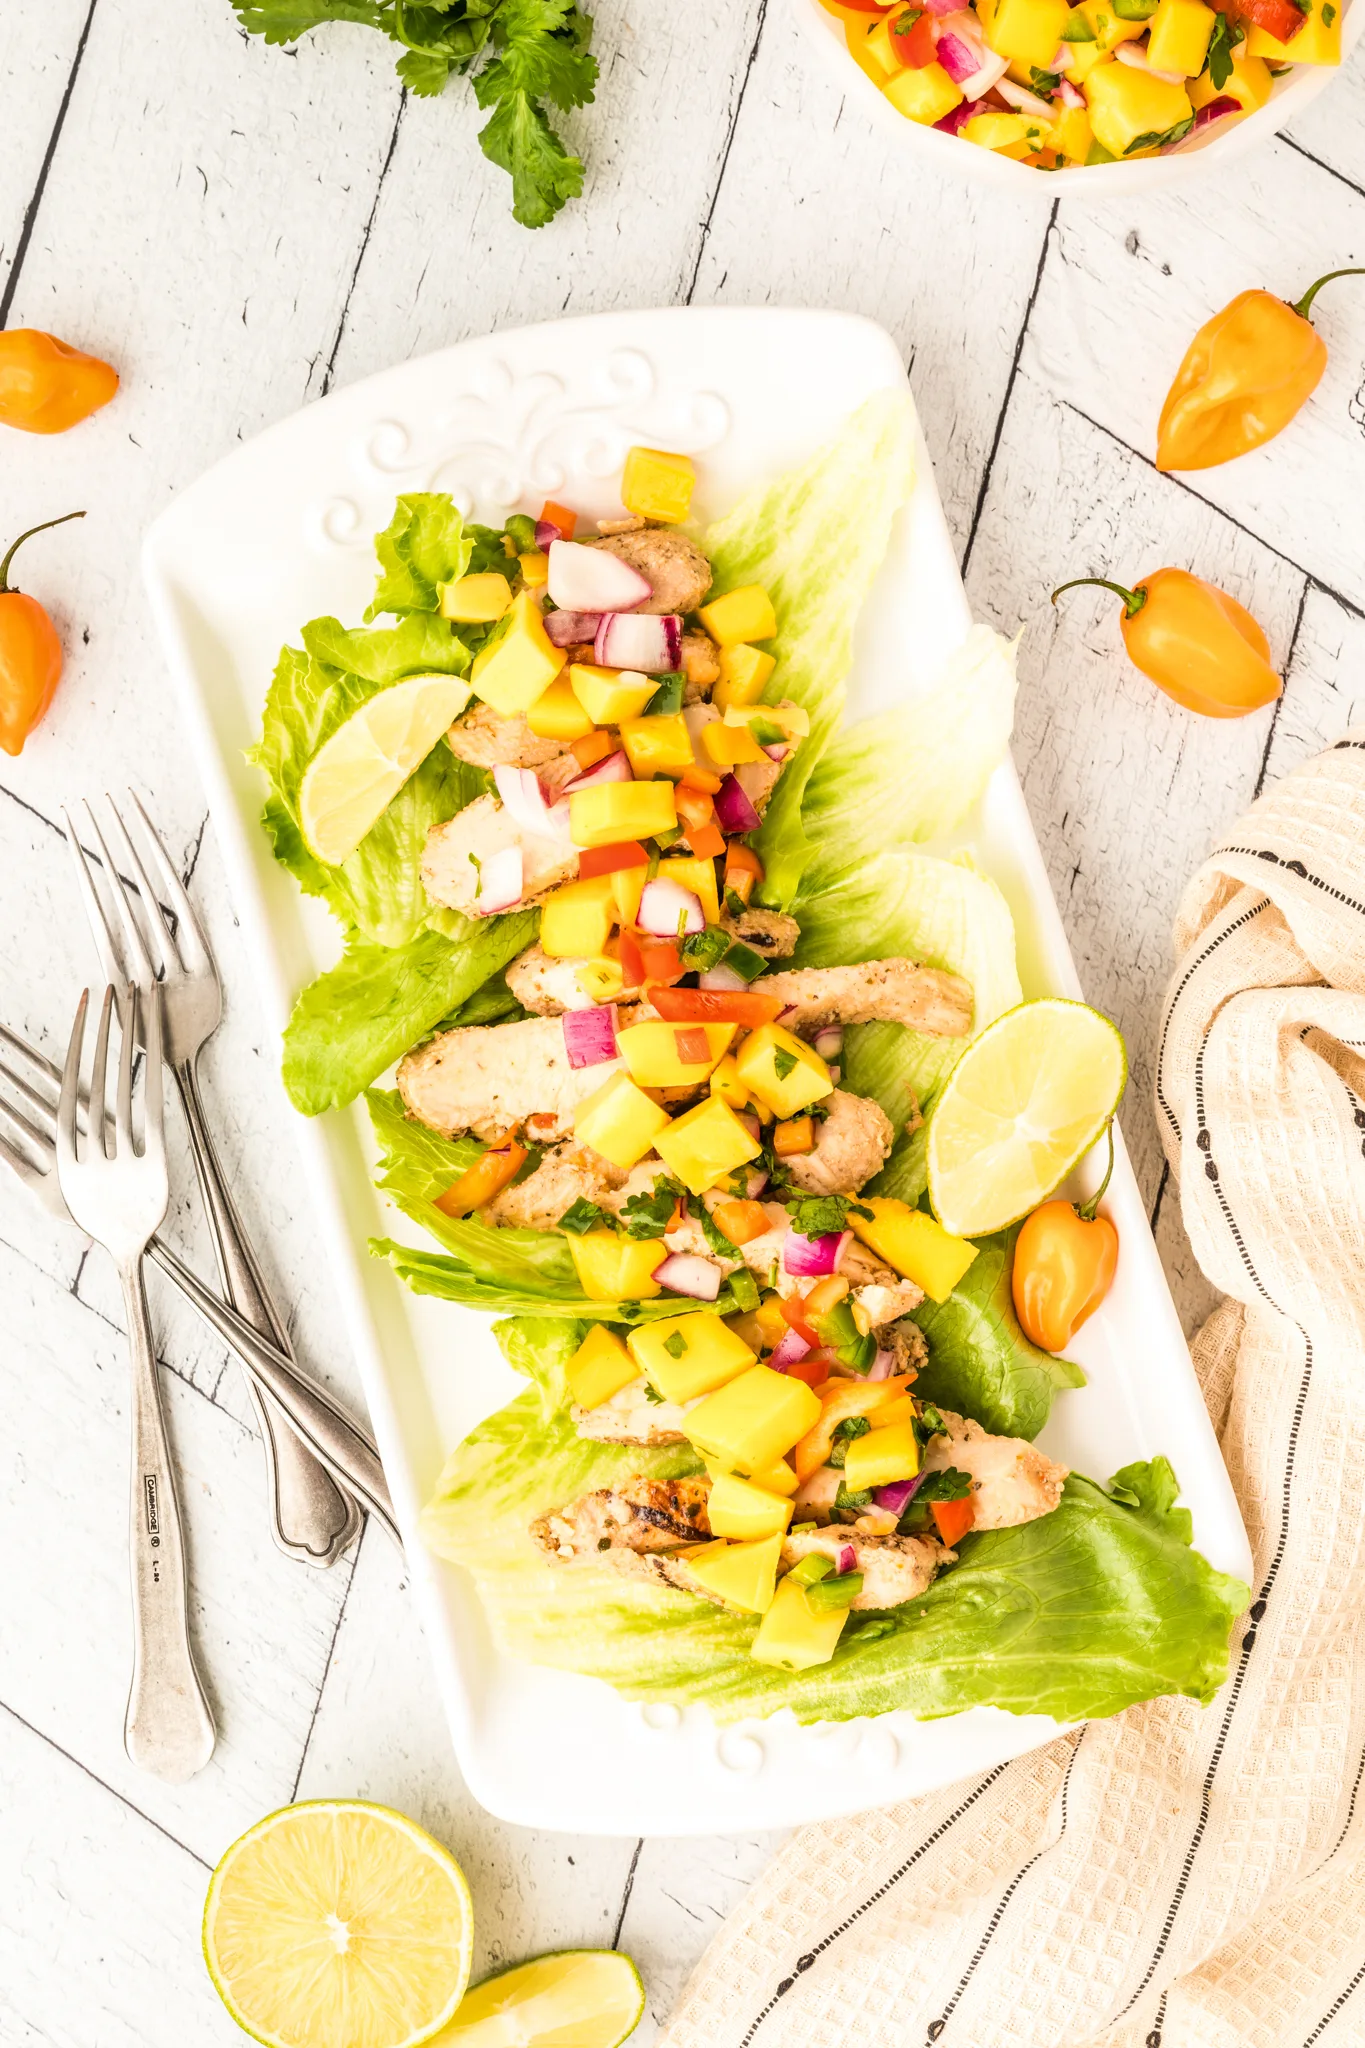 A photo of mango habanero salsa on top of chicken lettuce wraps